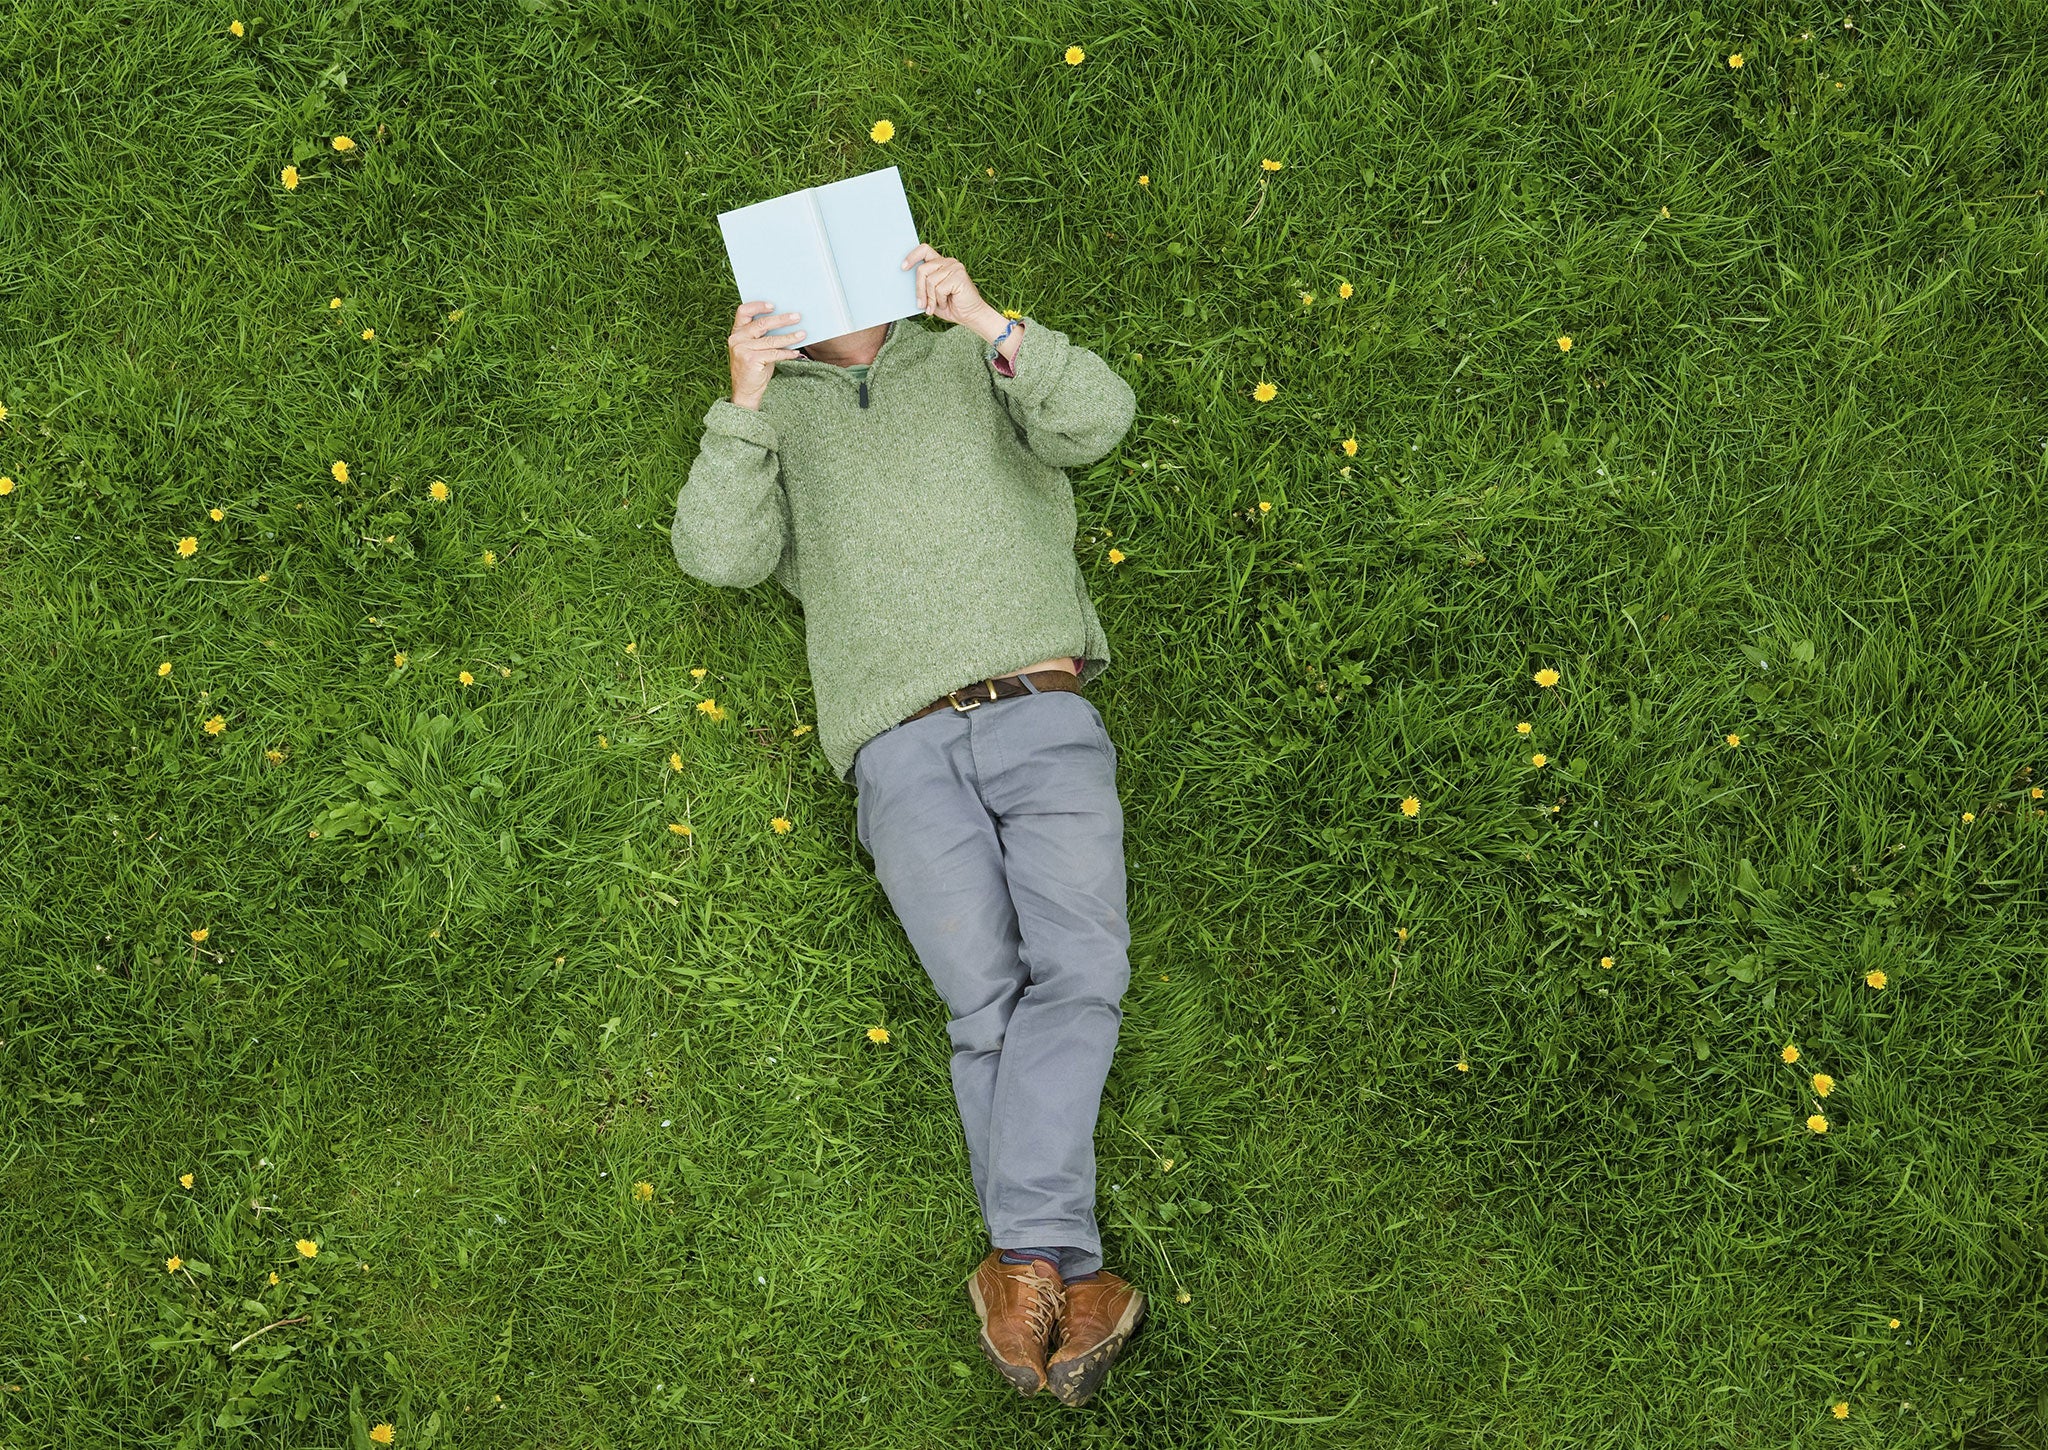 A man lying on his back reads a book